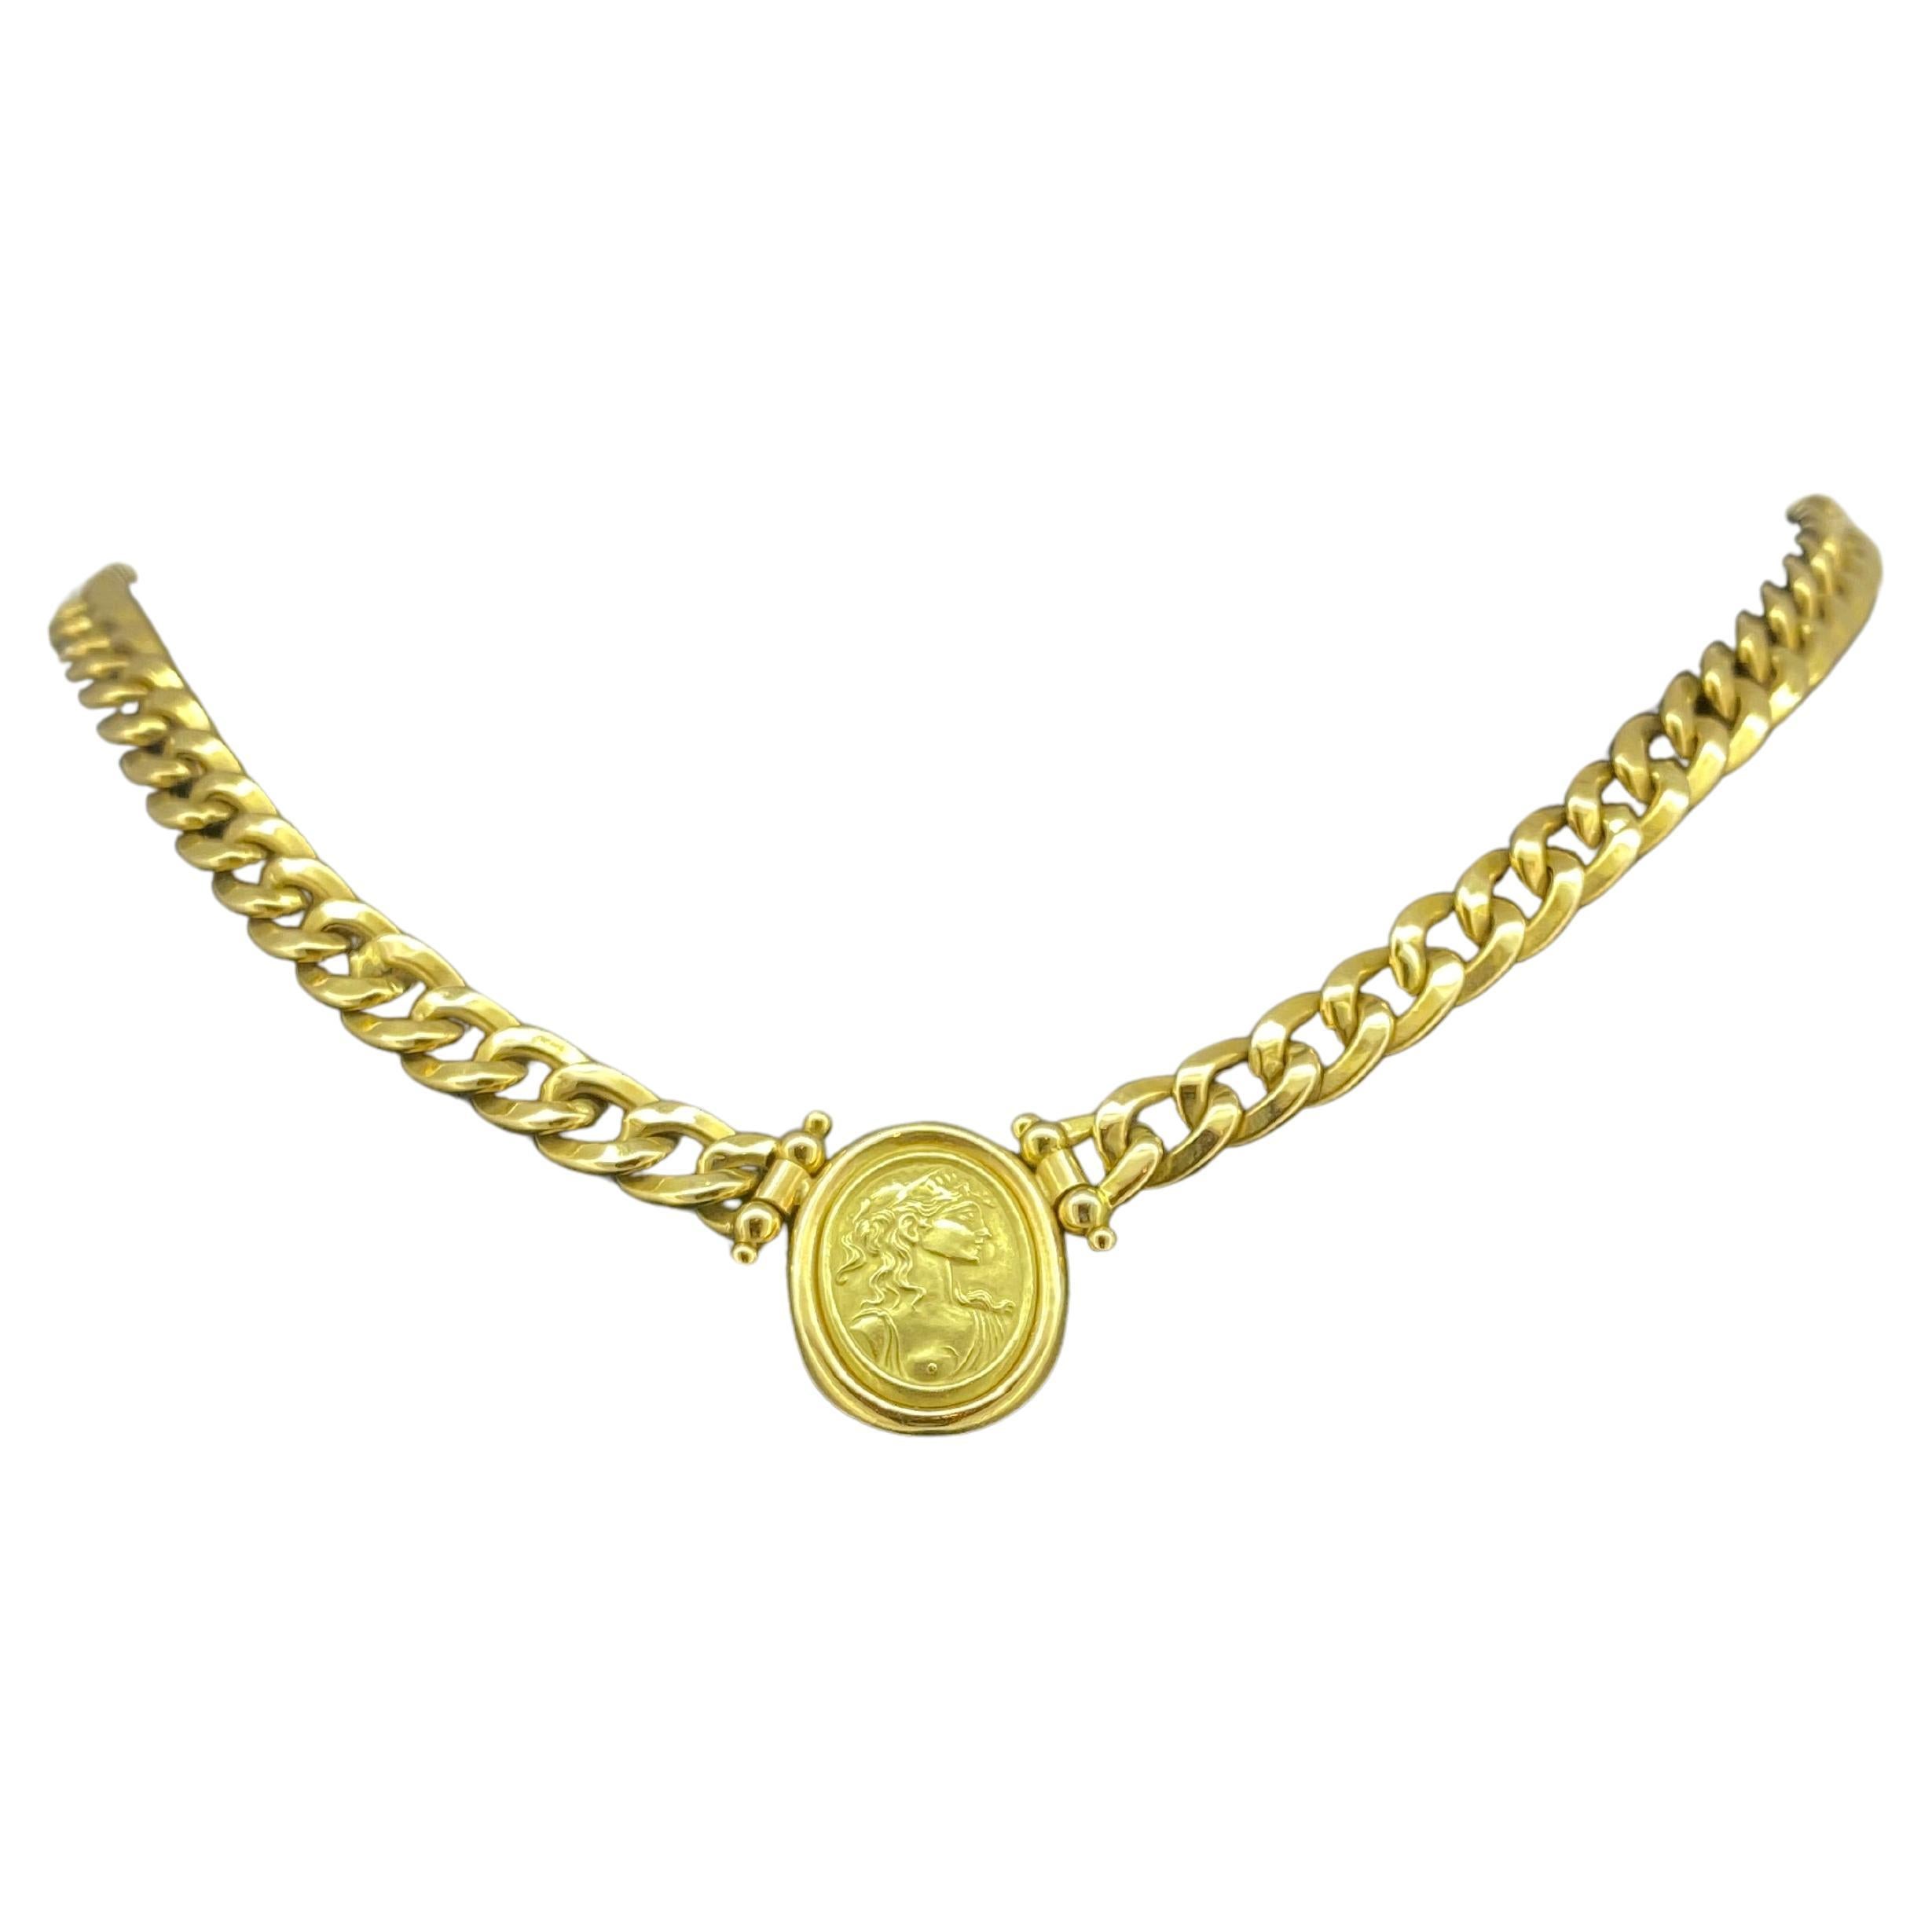 18K Yellow Gold Cameo Pendant Italian Vintage Necklace, Curb Links, 44cm long. For Sale